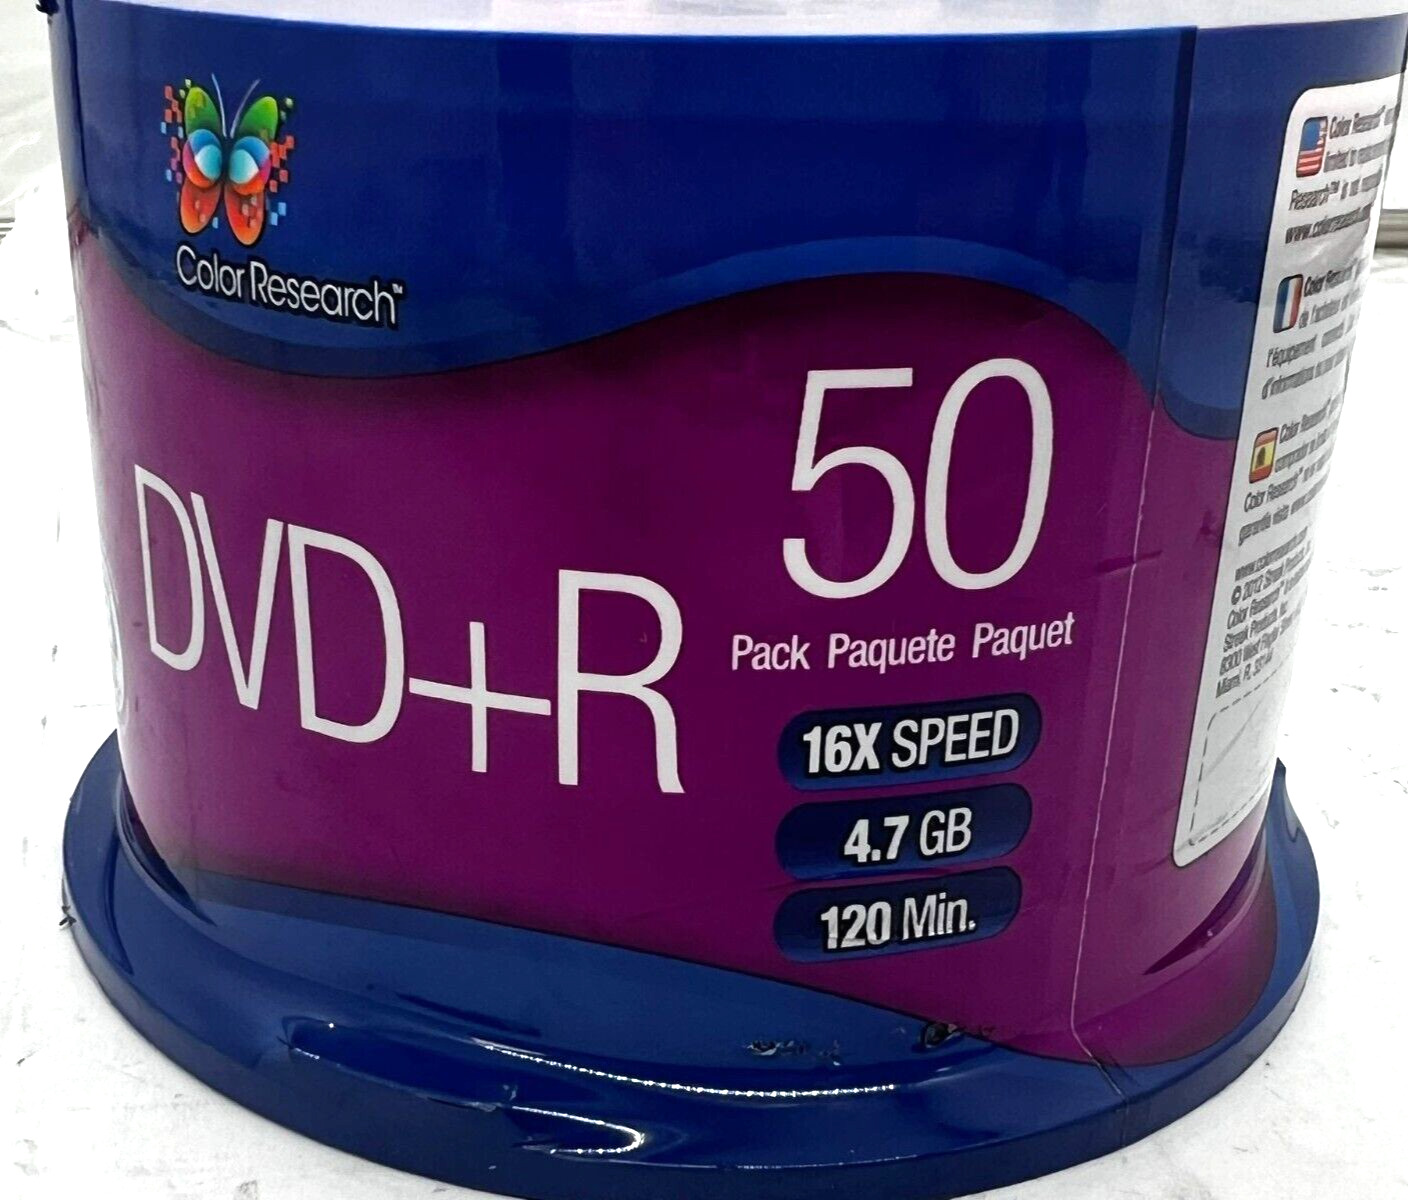 Color Research DVD+R 50 Pack 16X SPEED  4.7 GB 120 Min / SEALED